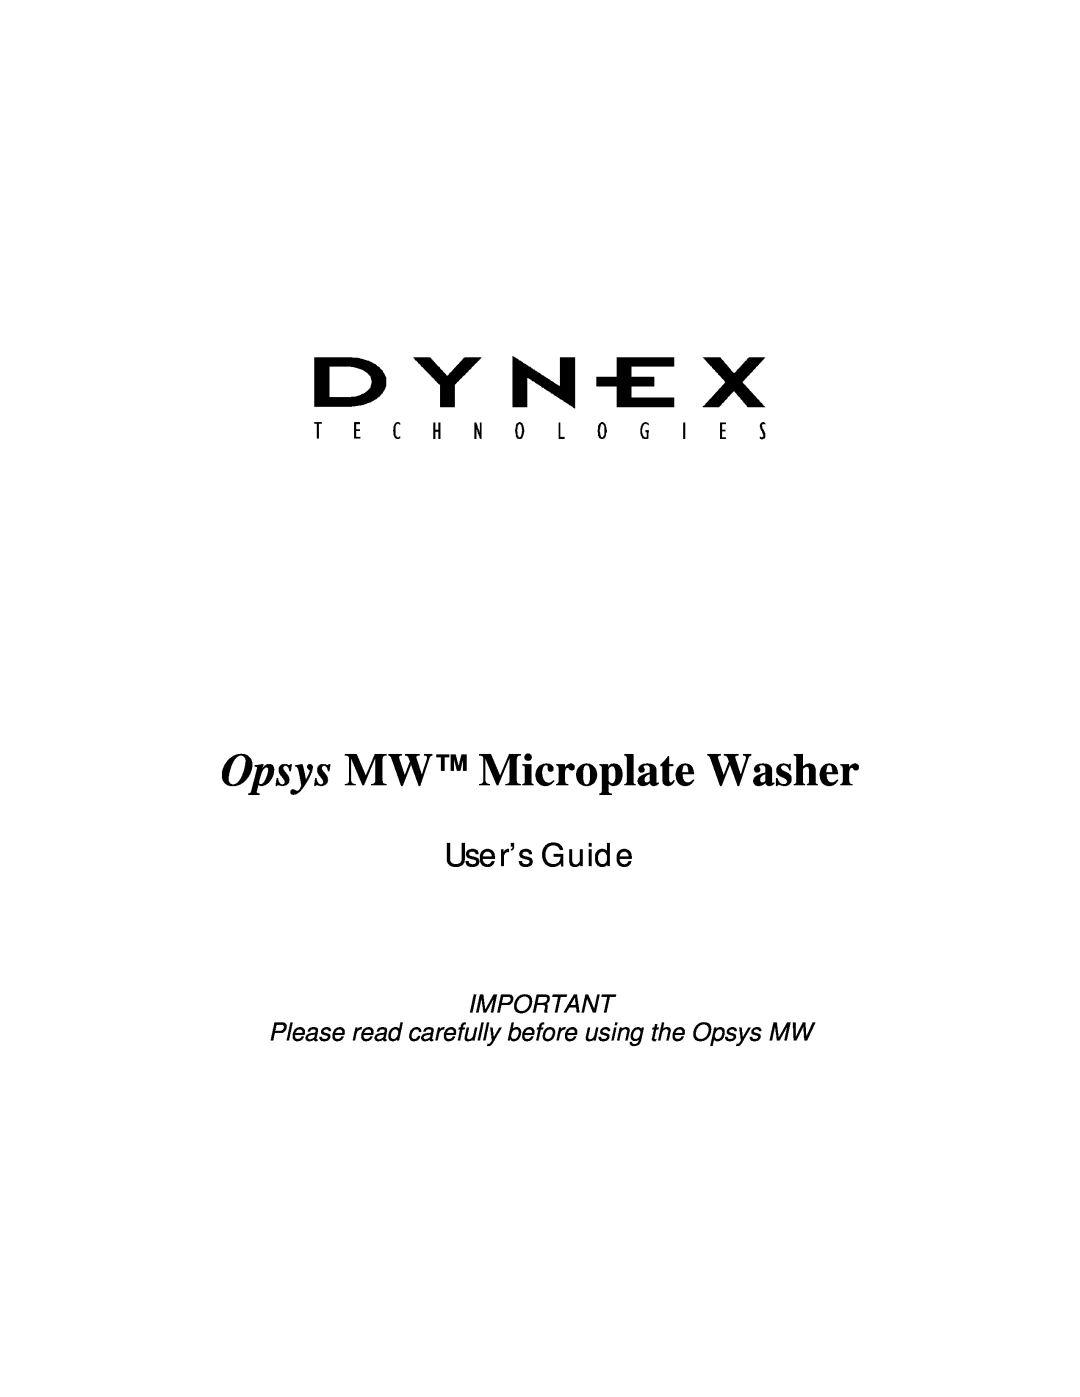 Dynex 91000051 manual Opsys MW Microplate Washer, User’s Guide, Please read carefully before using the Opsys MW 